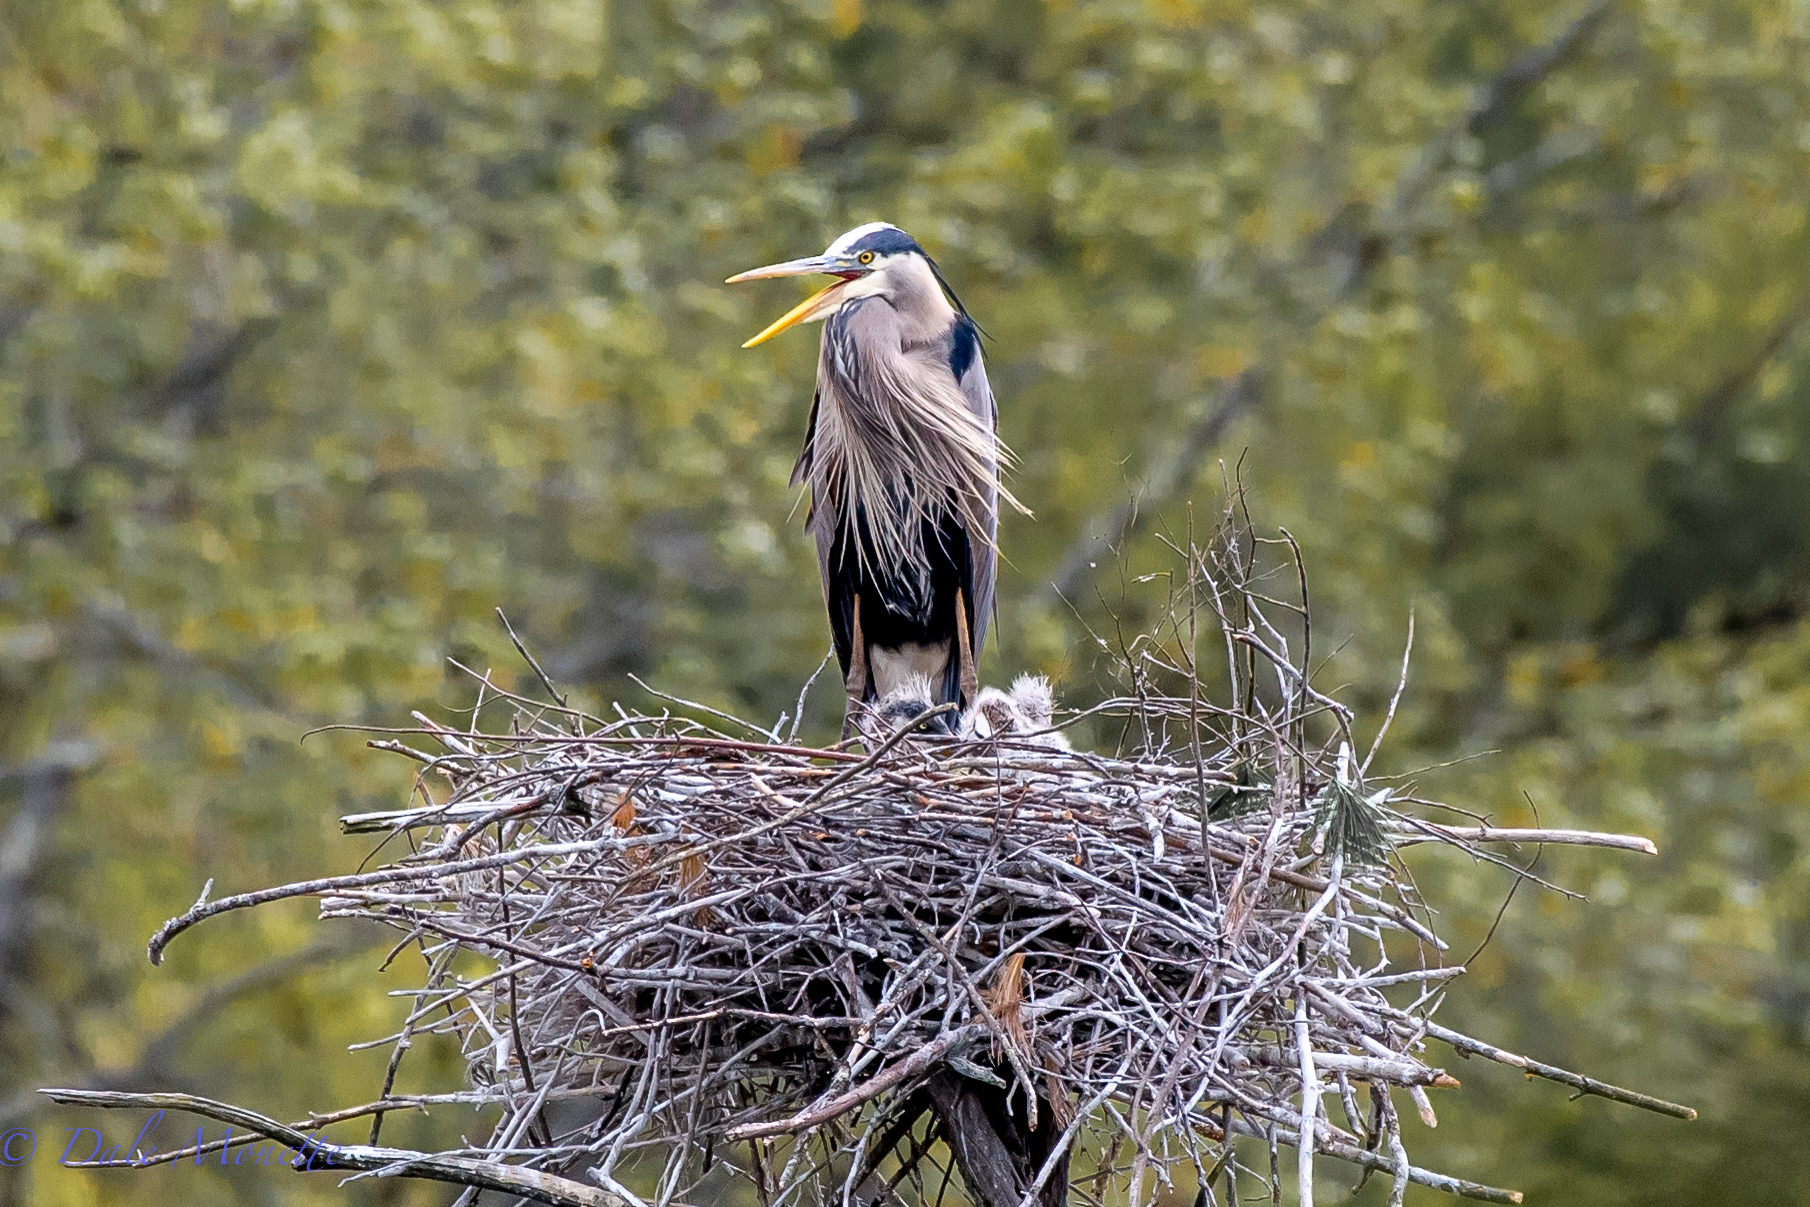    Ive been watching these herons from a far distance once a week for the last month or so because I knew there were eggs they were incubating and herons will move at the drop of a pin. Today I hiked in, crept up to where I could see through the tree